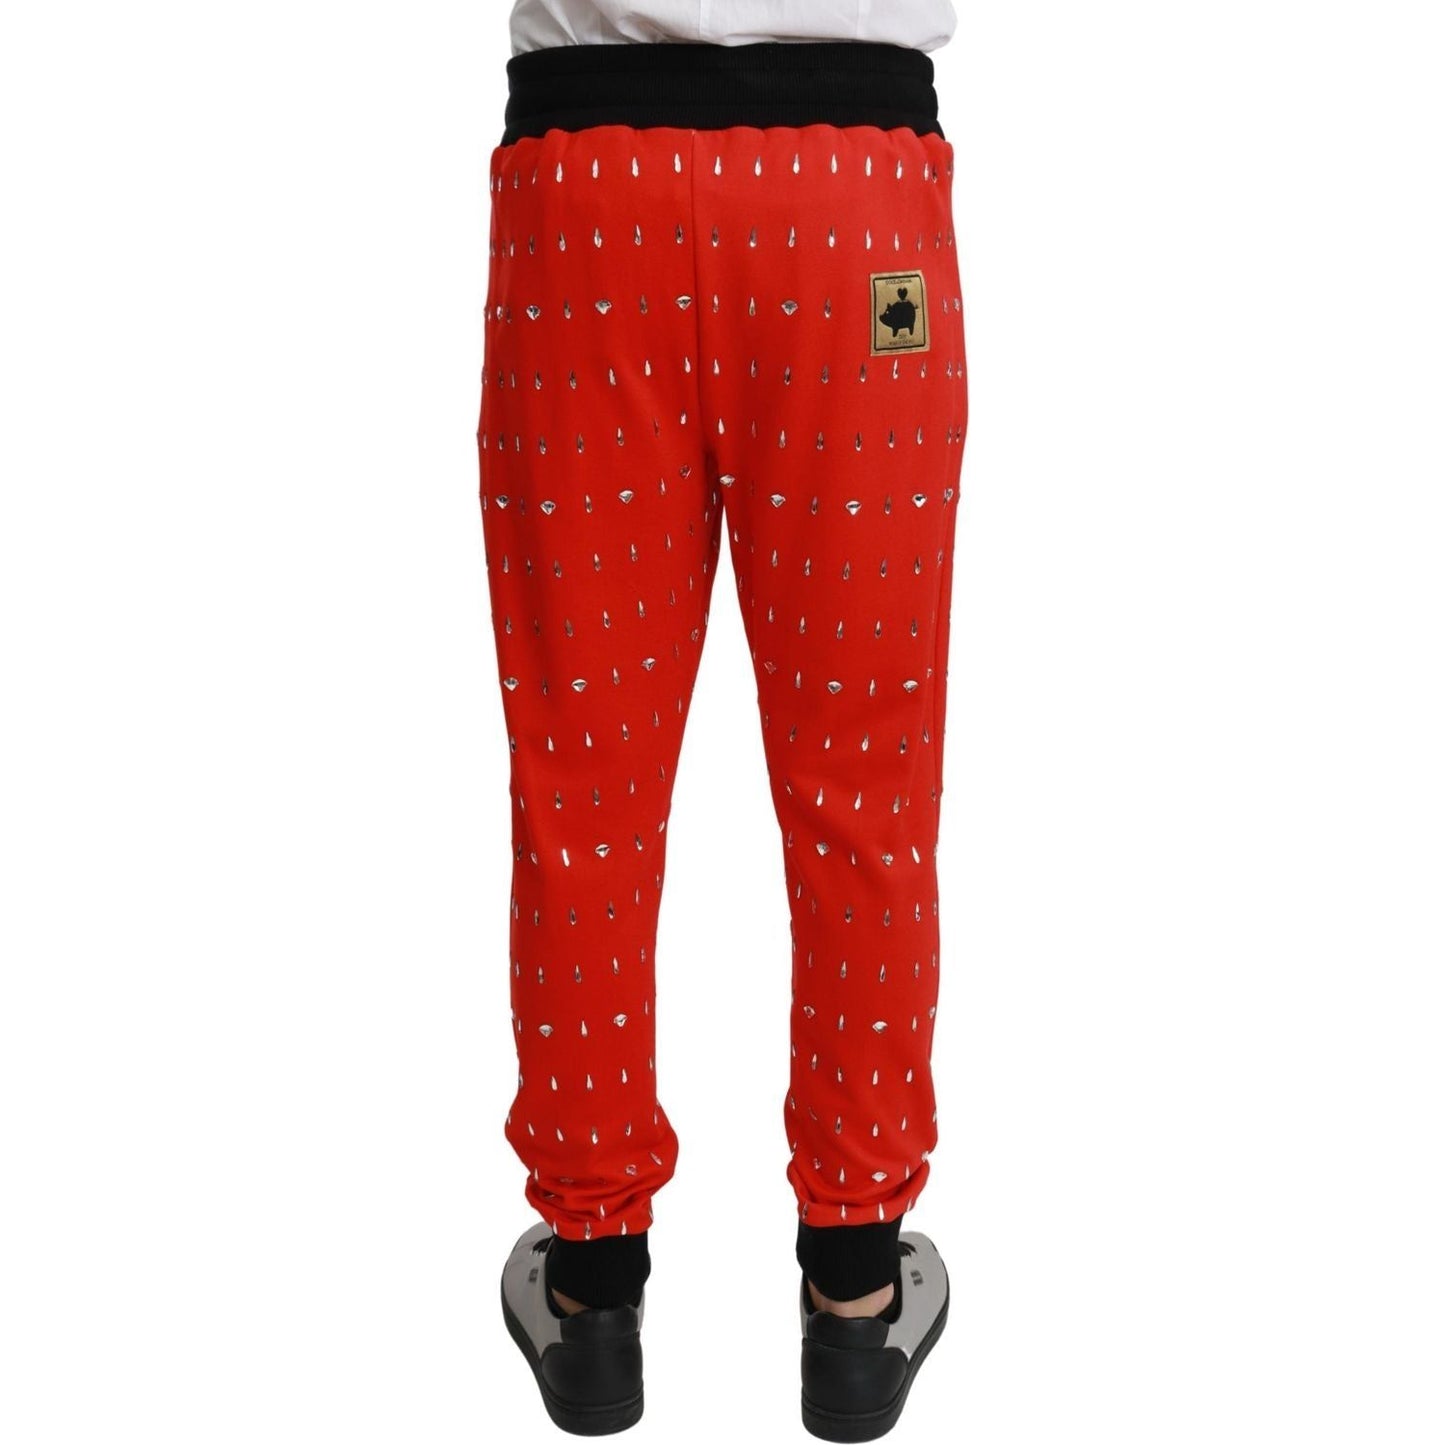 Dolce & Gabbana Chic Red Piggy Bank Print Sweatpants red-piggy-bank-cotton-crystal-trousers-pants